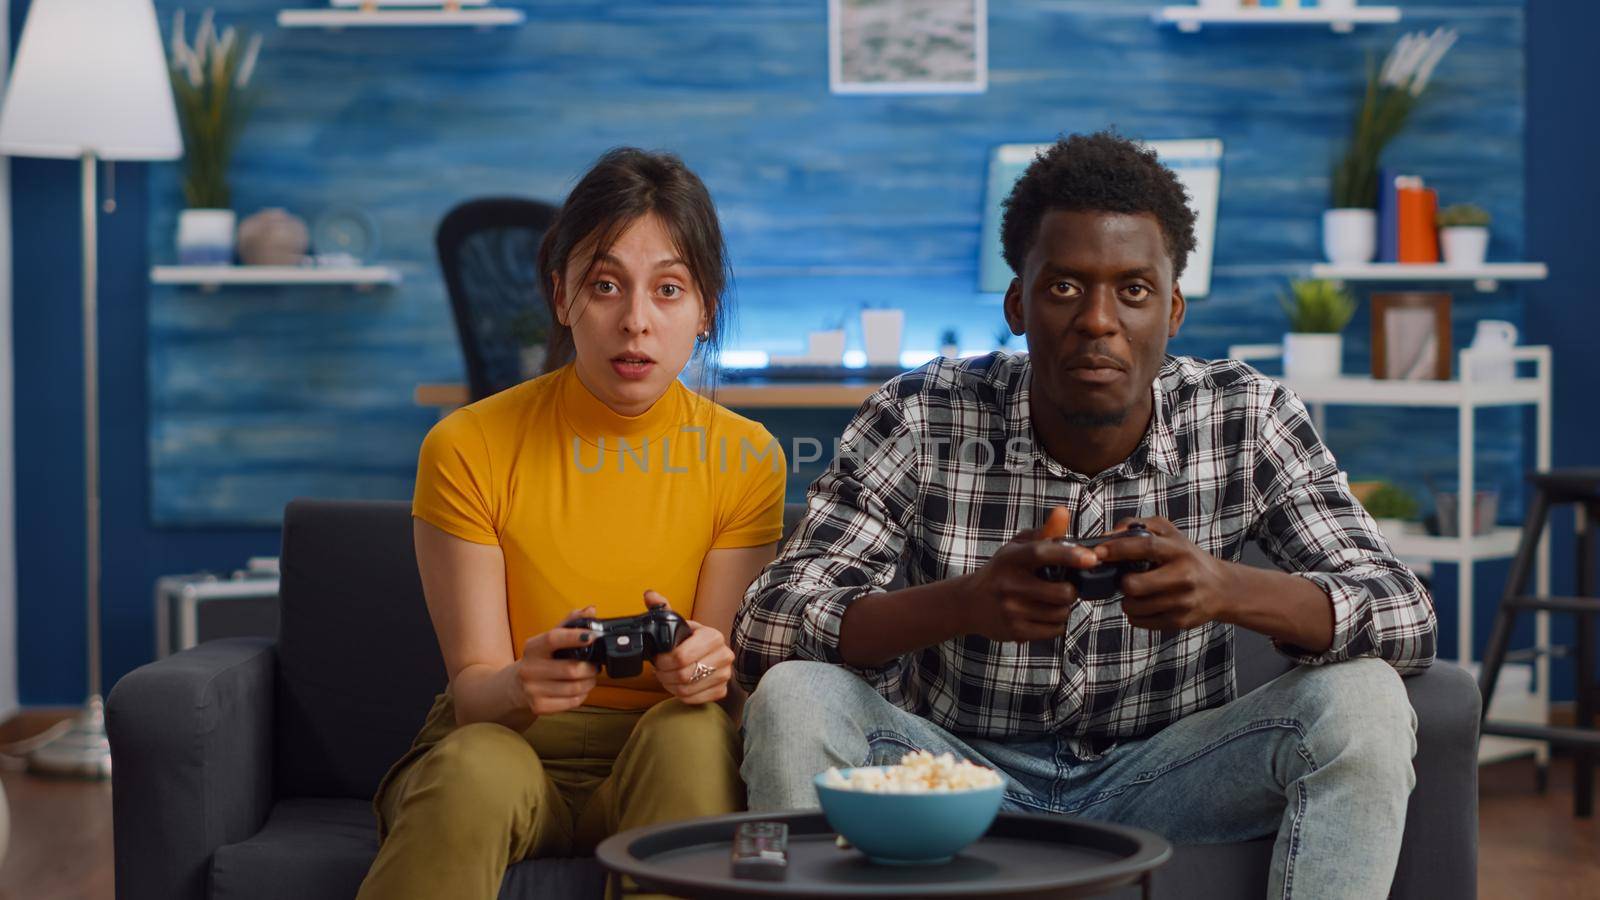 Modern interracial couple playing with joysticks for video game on console in living room. Young mixed race partners doing fun activity with television and controller together at home